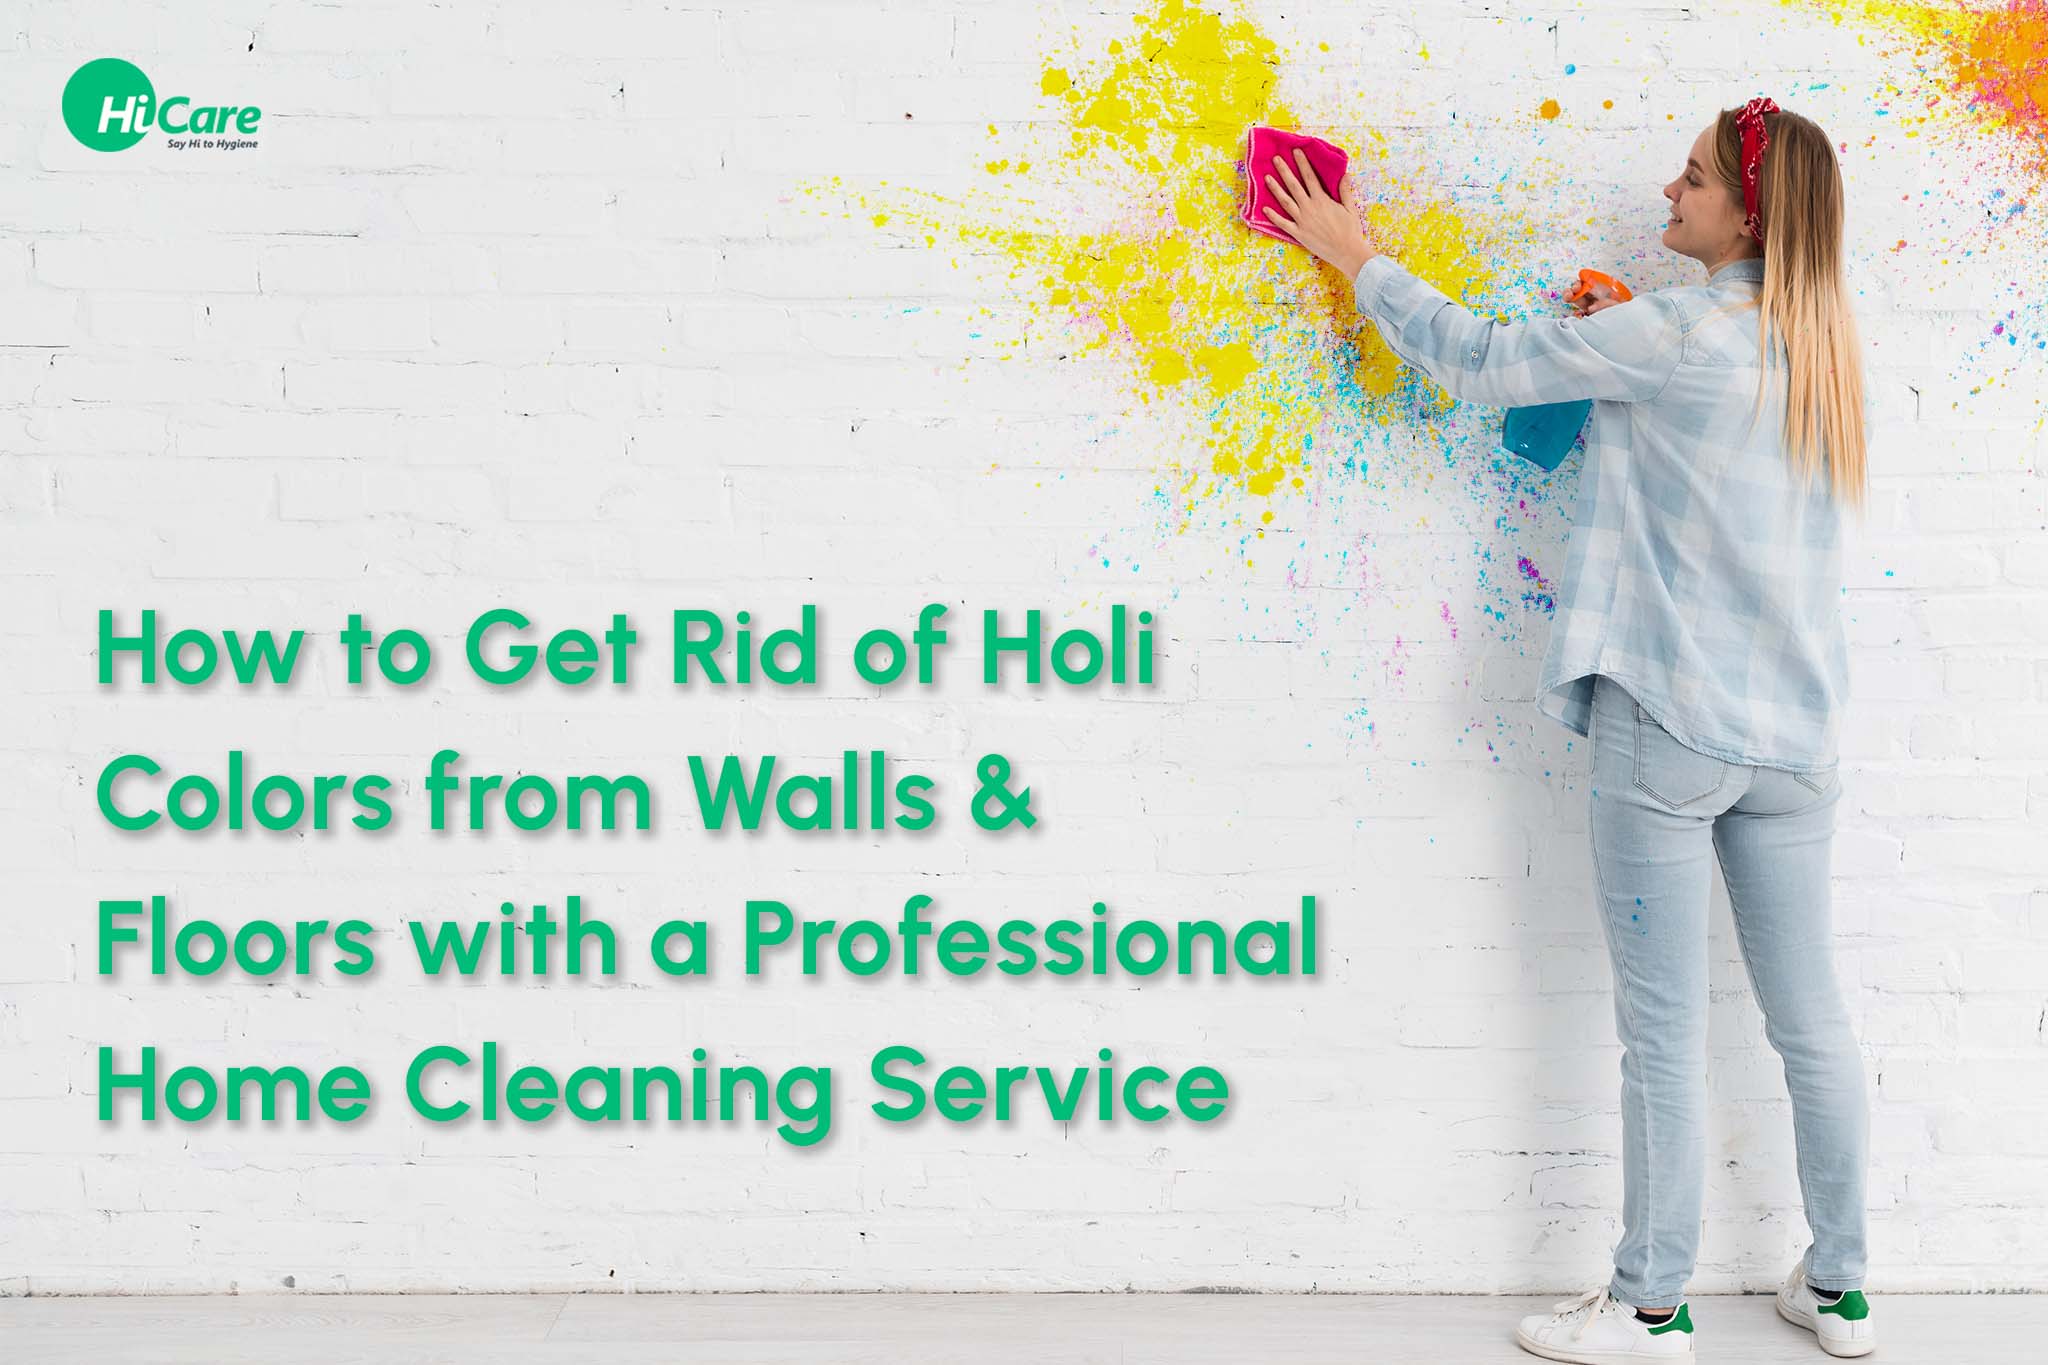 How to Get Rid of Holi Colors from Walls and Floors with a Professional Home Cleaning Service